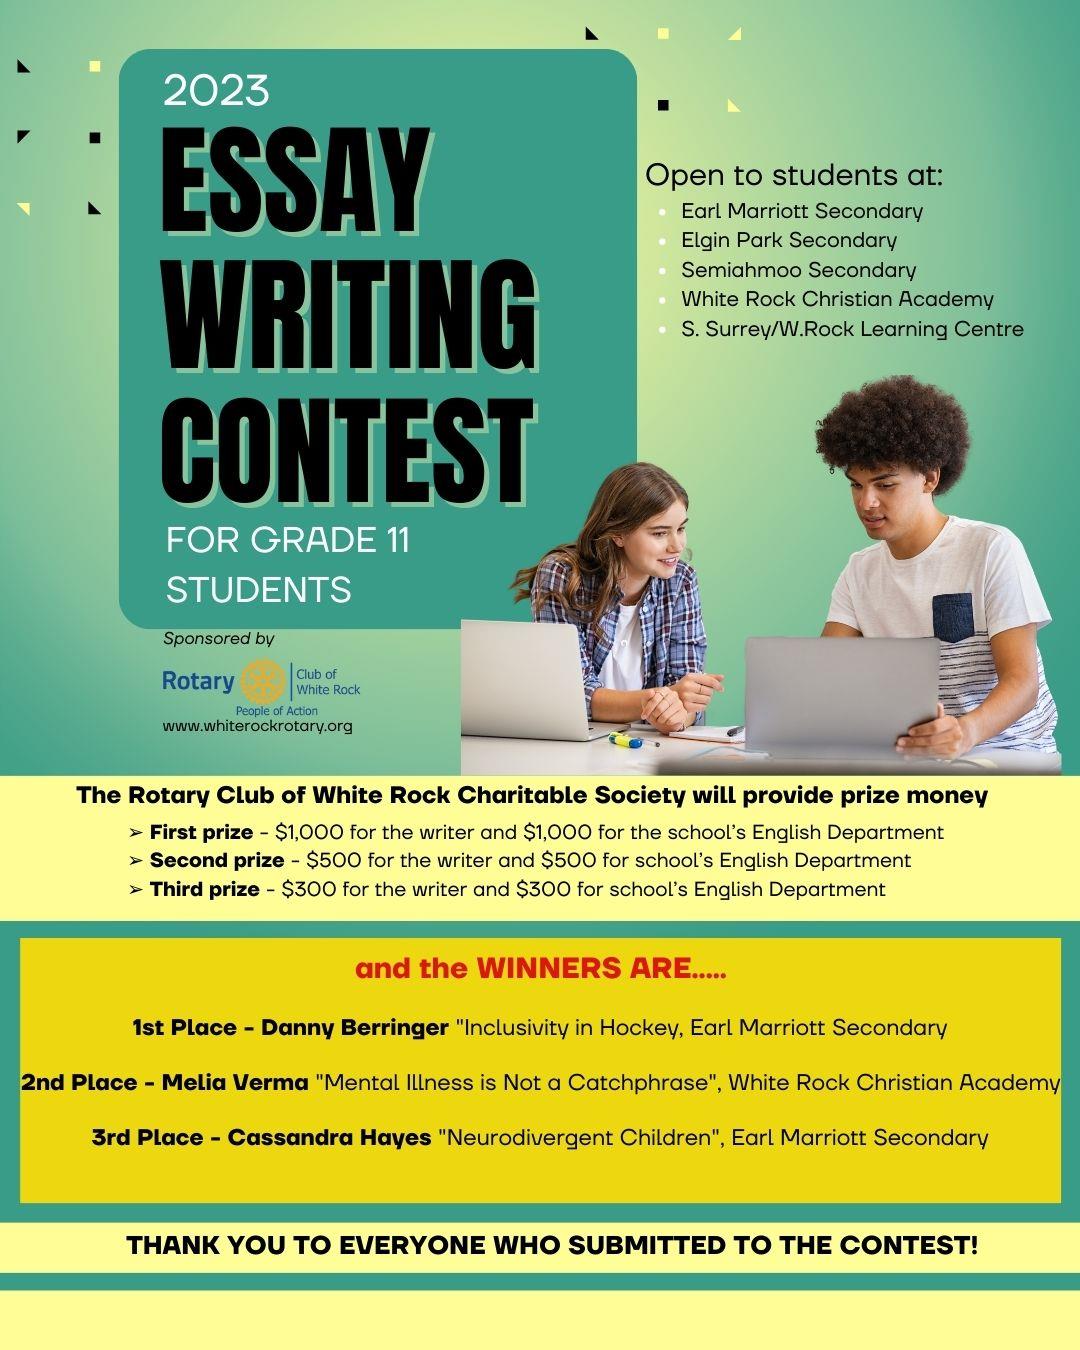 Essay Writing Contest Rotary Club of White Rock